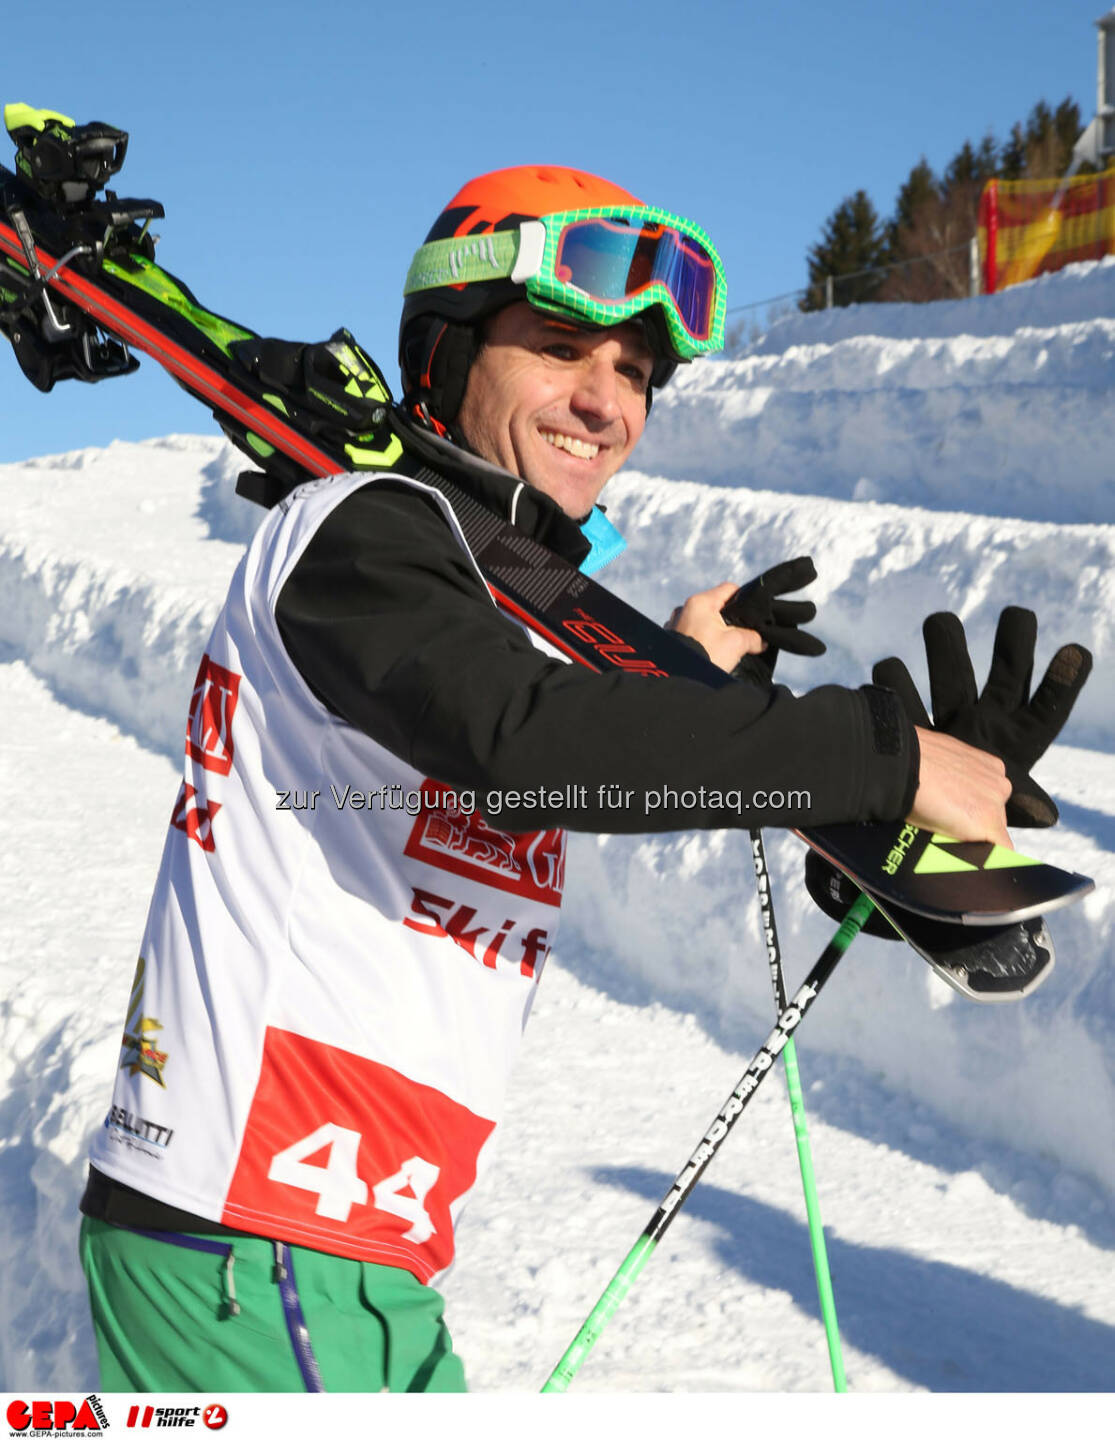 Ski for Gold Charity Race. Image shows Thomas Reisenberger. Photo: GEPA pictures/ Harald Steiner